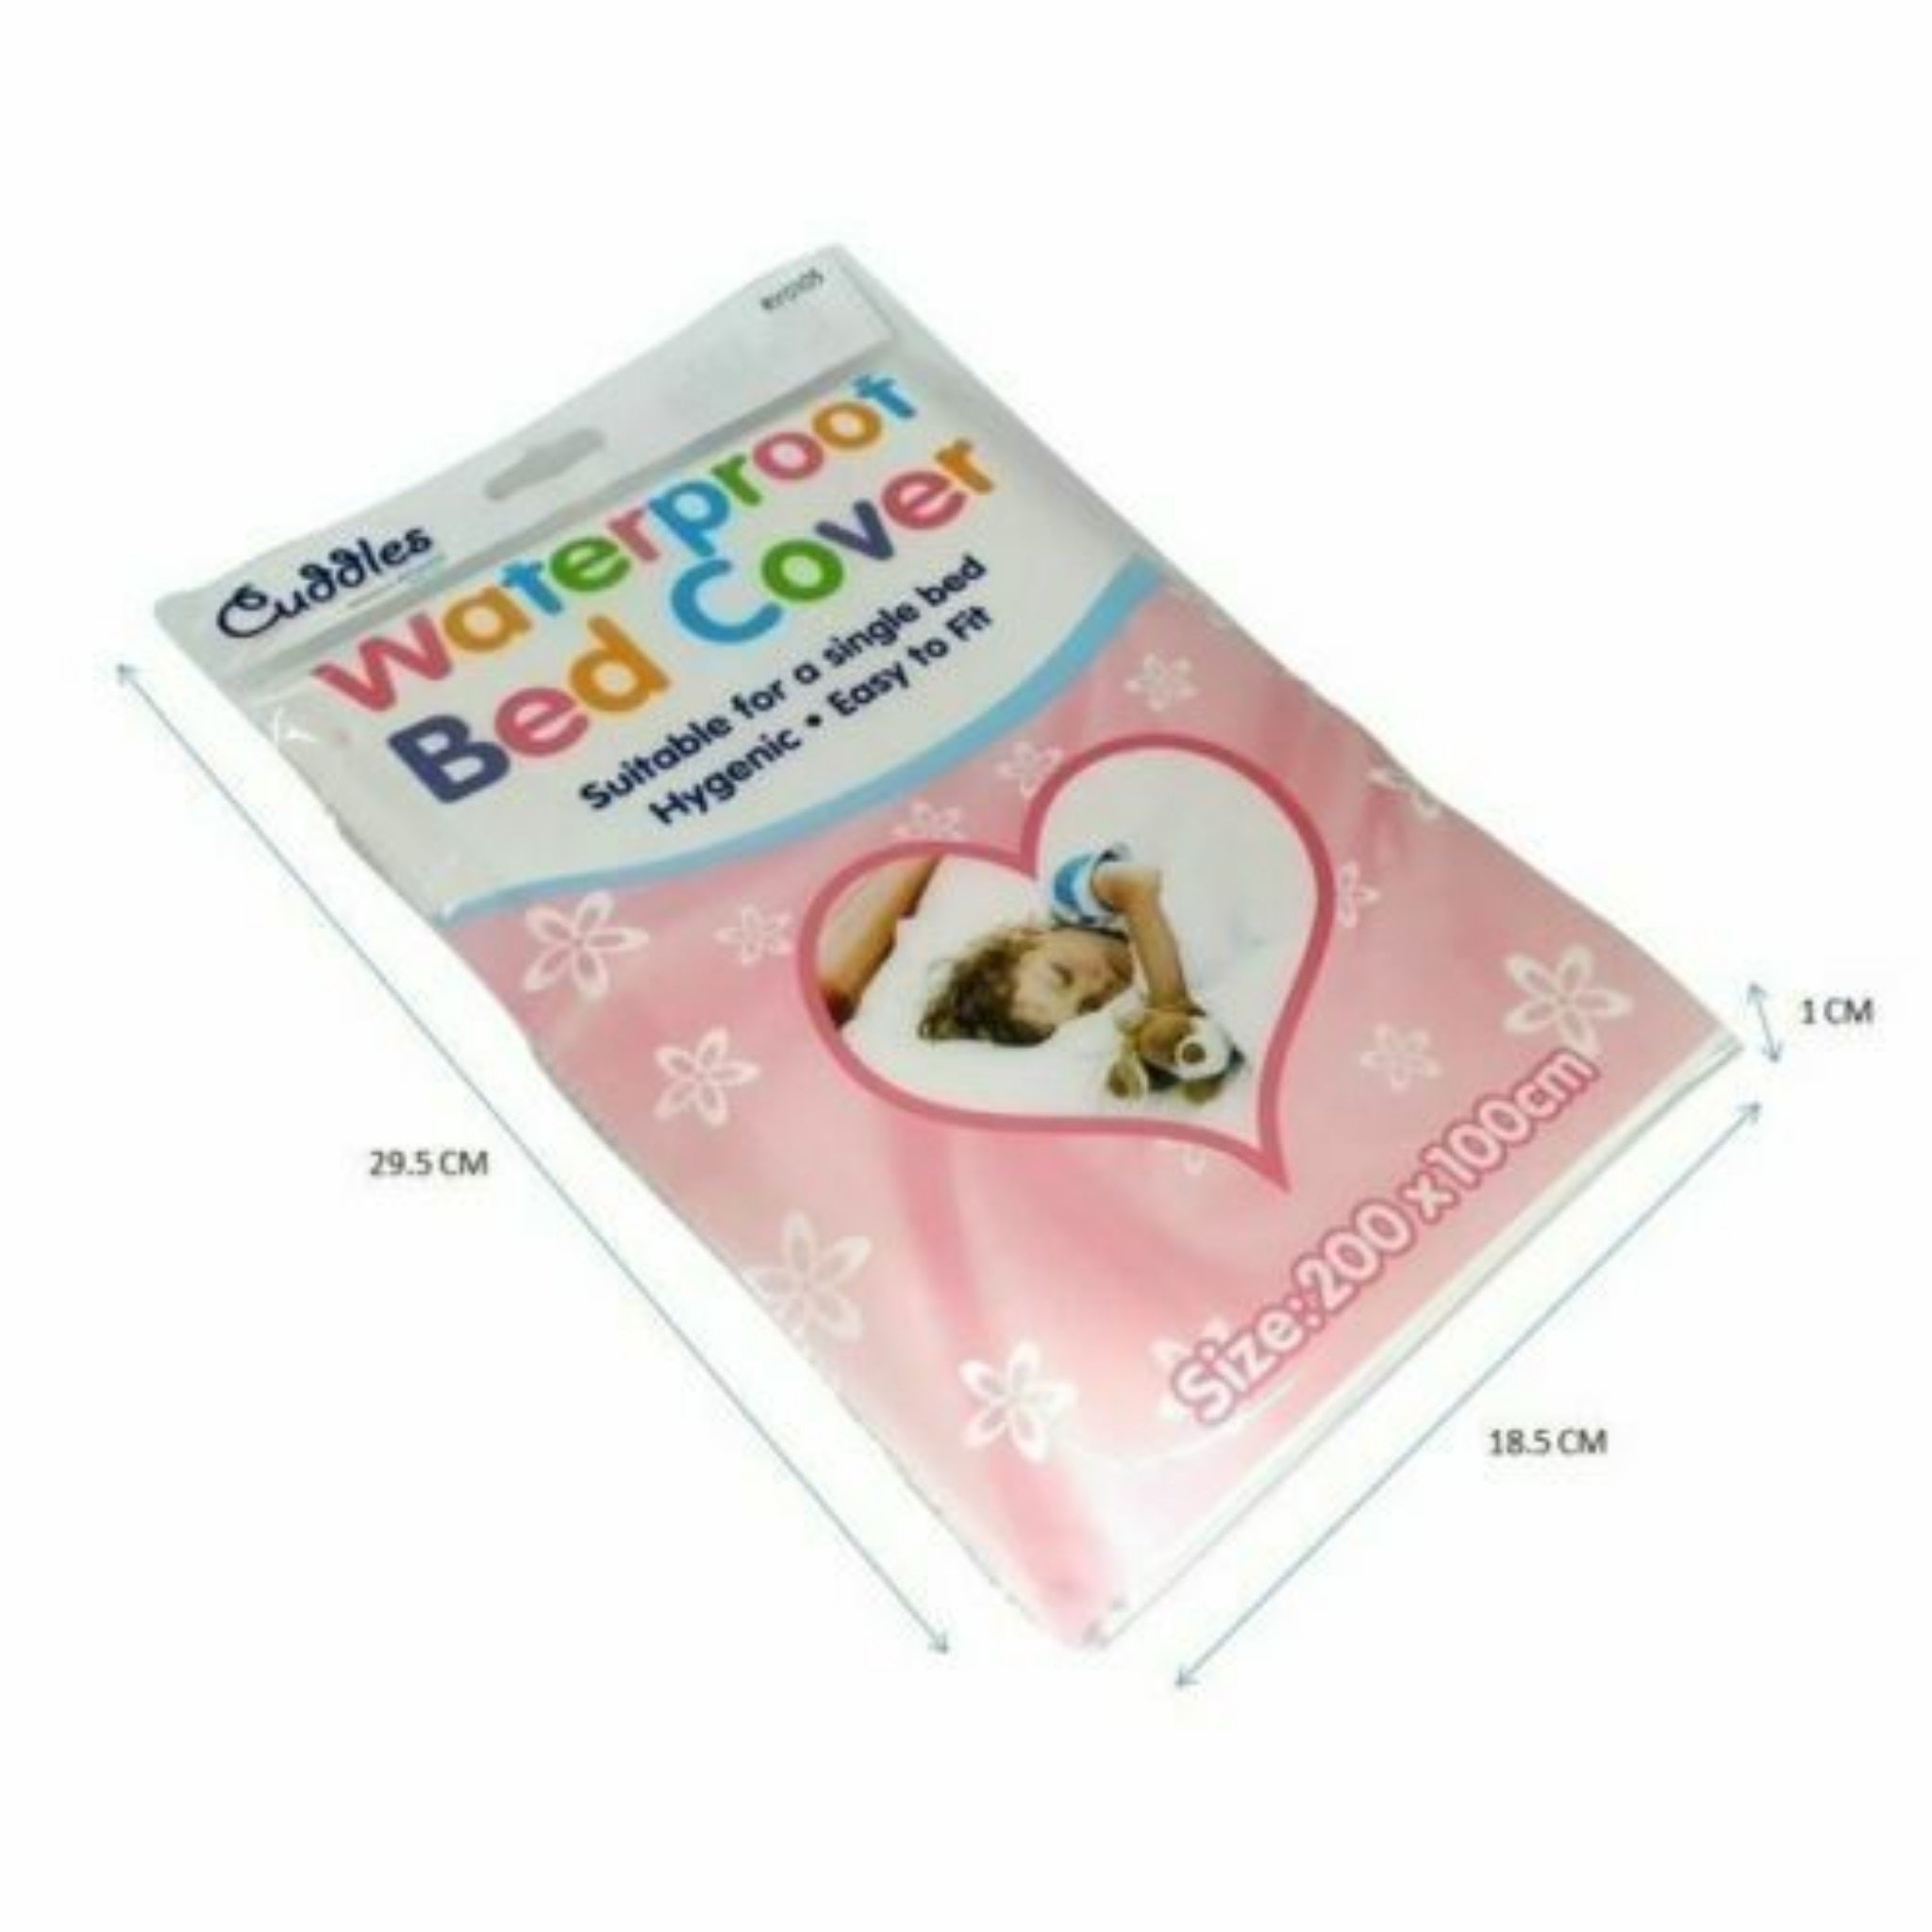 Beclen Harp Waterproof Baby Toddler Bed Cover Mattress Wet Wetting Protector Nursery Child  White Single Sheet 200x100